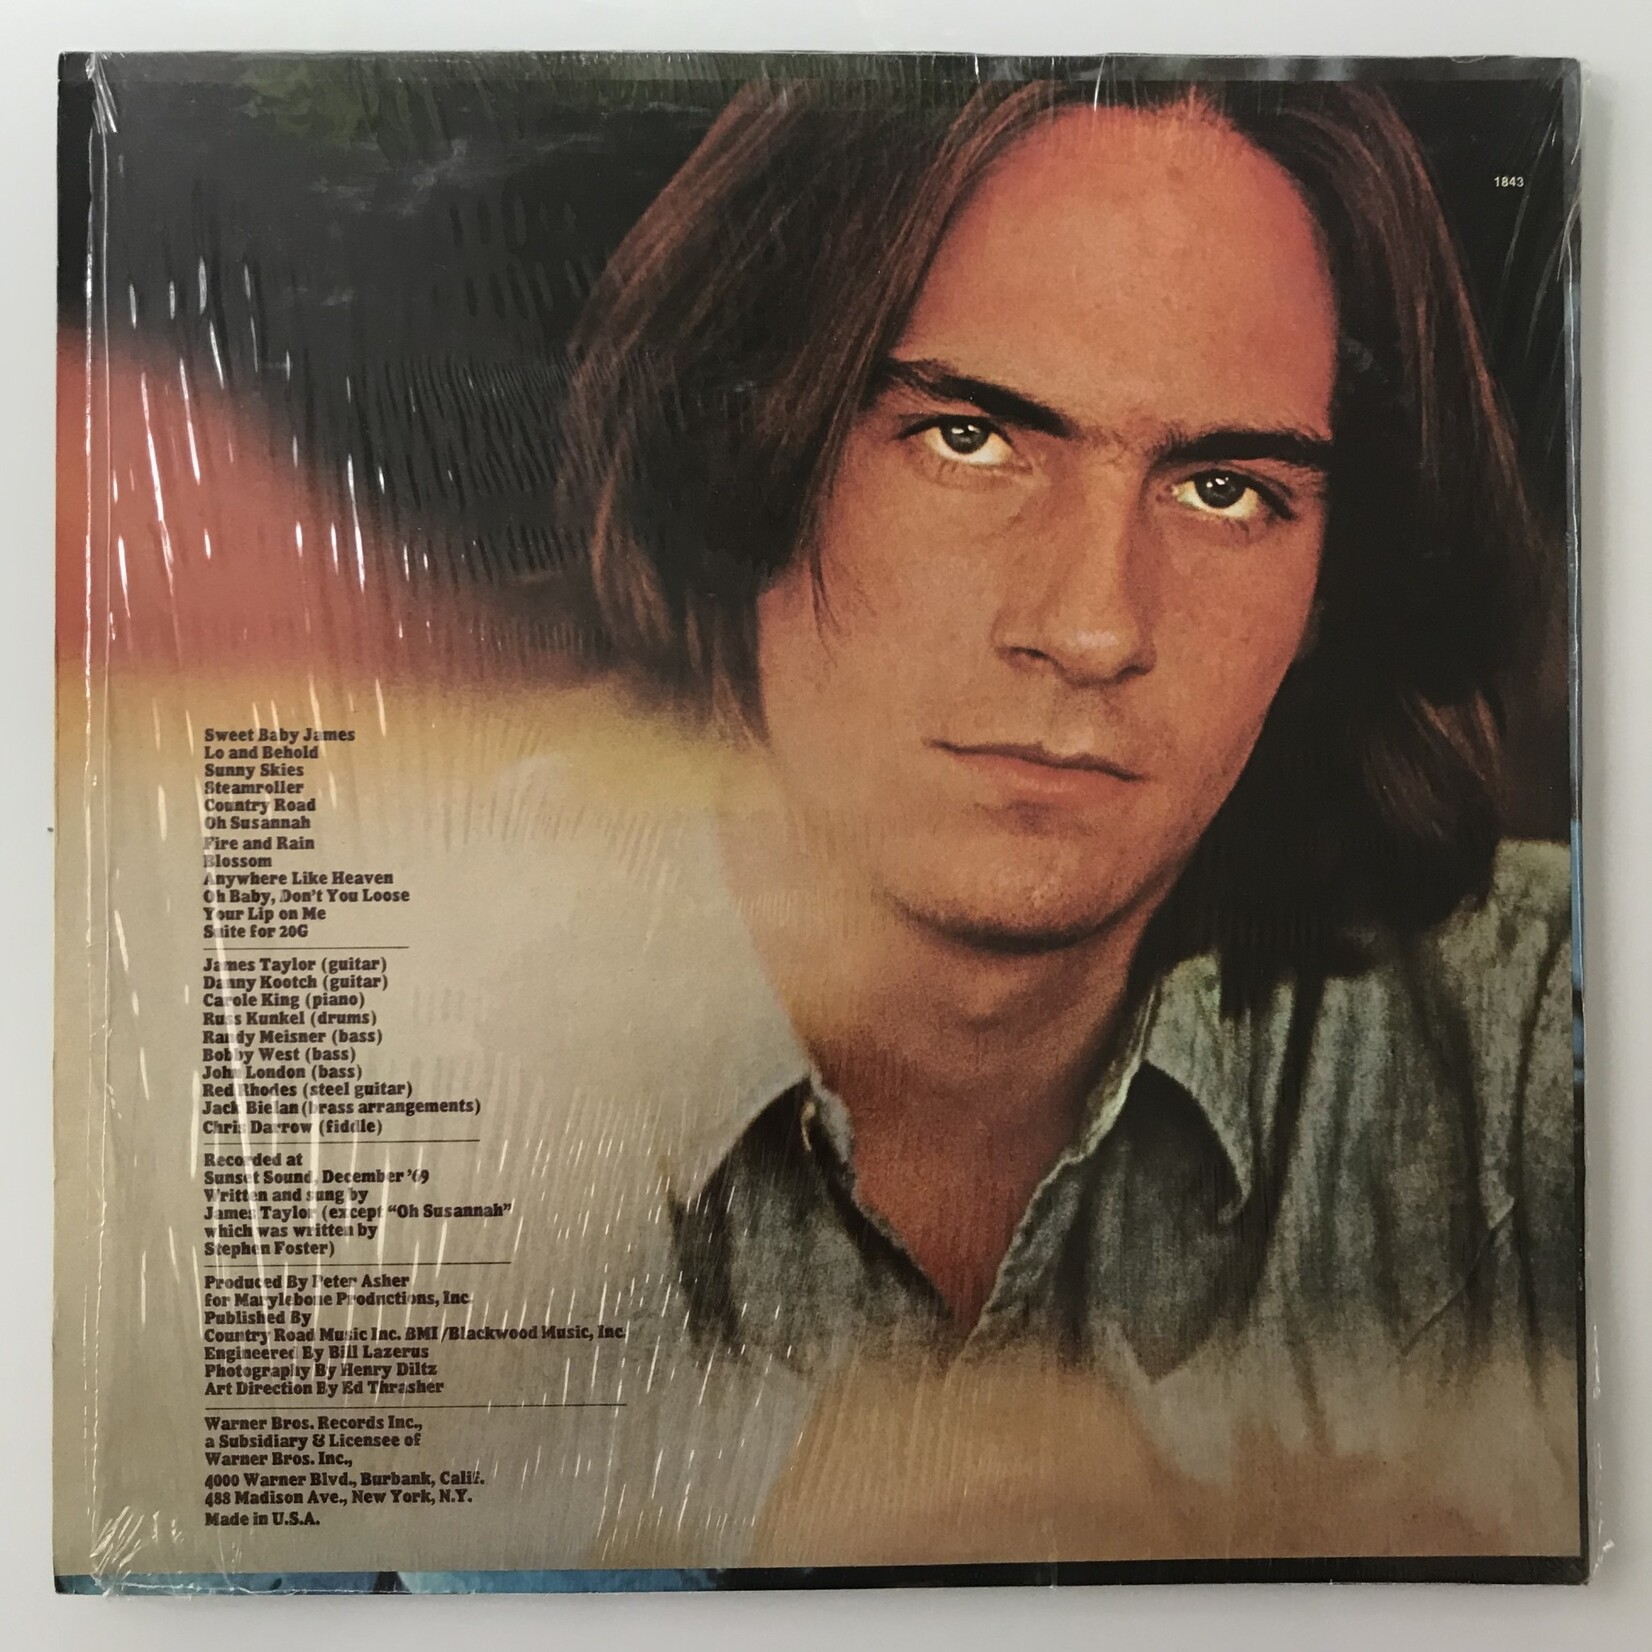 James Taylor - Sweet Baby James - 1843 - Vinyl LP with Poster (USED)